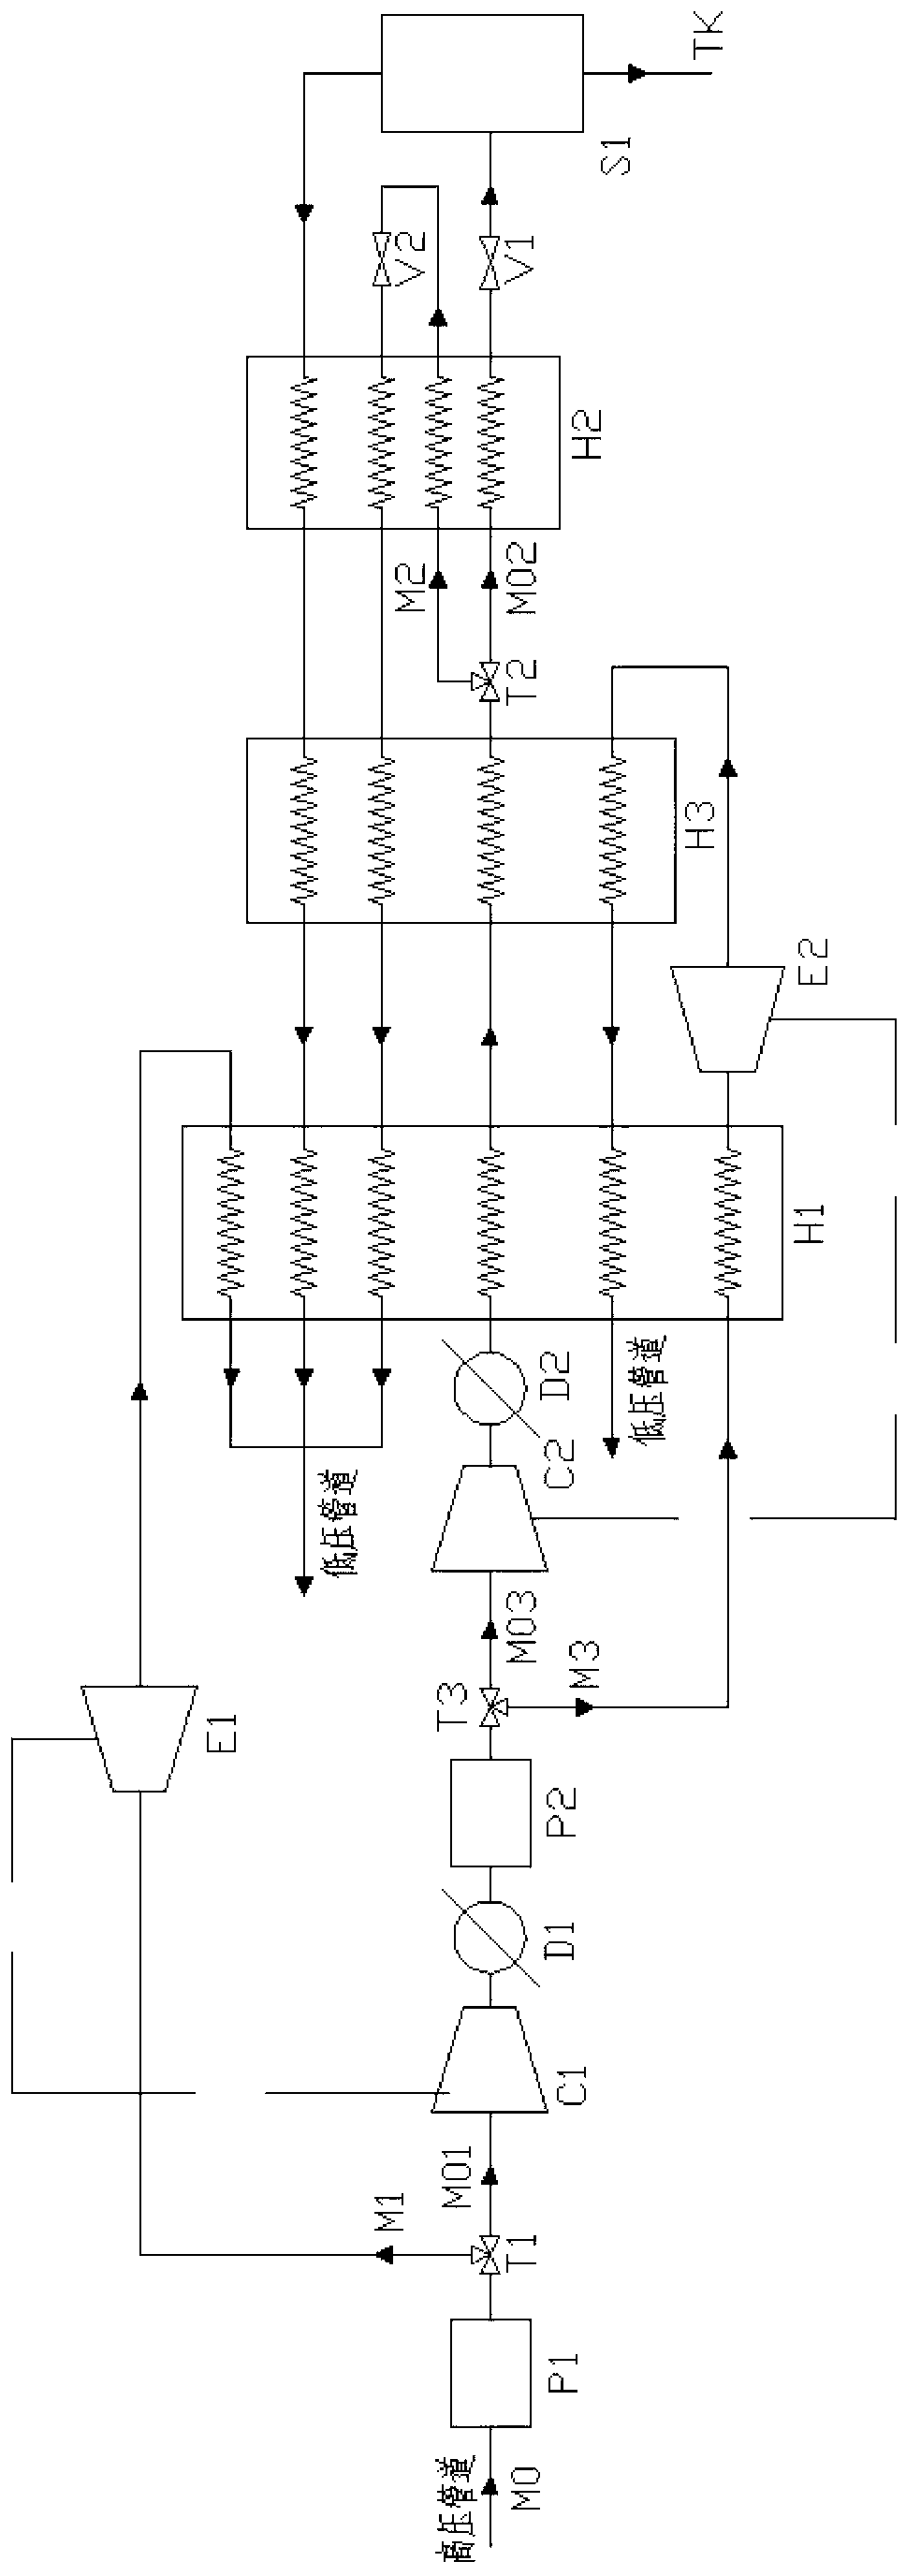 Liquefaction system for producing LNG (Liquefied Natural Gas) by using pressure energy of pipeline